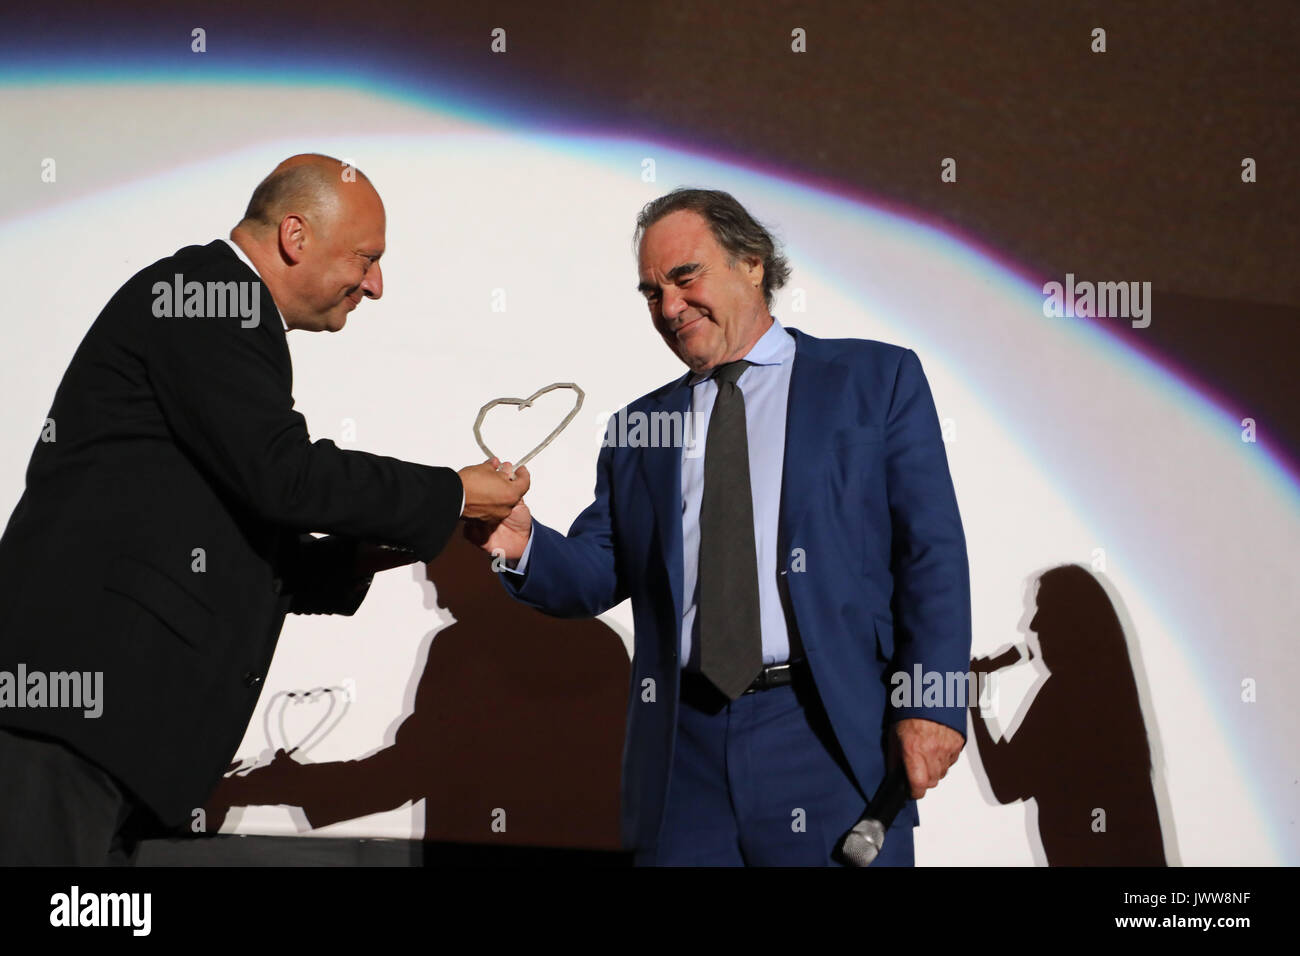 Sarajevo, Bosnia and Herzegovina. 13th Aug, 2017. Famous U.S. film director Oliver Stone (R) receives the Honorary Heart of Sarajevo Award from the festival director Mirsad Purivatra (L) during the 23rd Sarajevo Film Festival(SFF) in Sarajevo, Bosnia and Herzegovina, on Aug. 13, 2017. Credit: Haris Memija/Xinhua/Alamy Live News Stock Photo